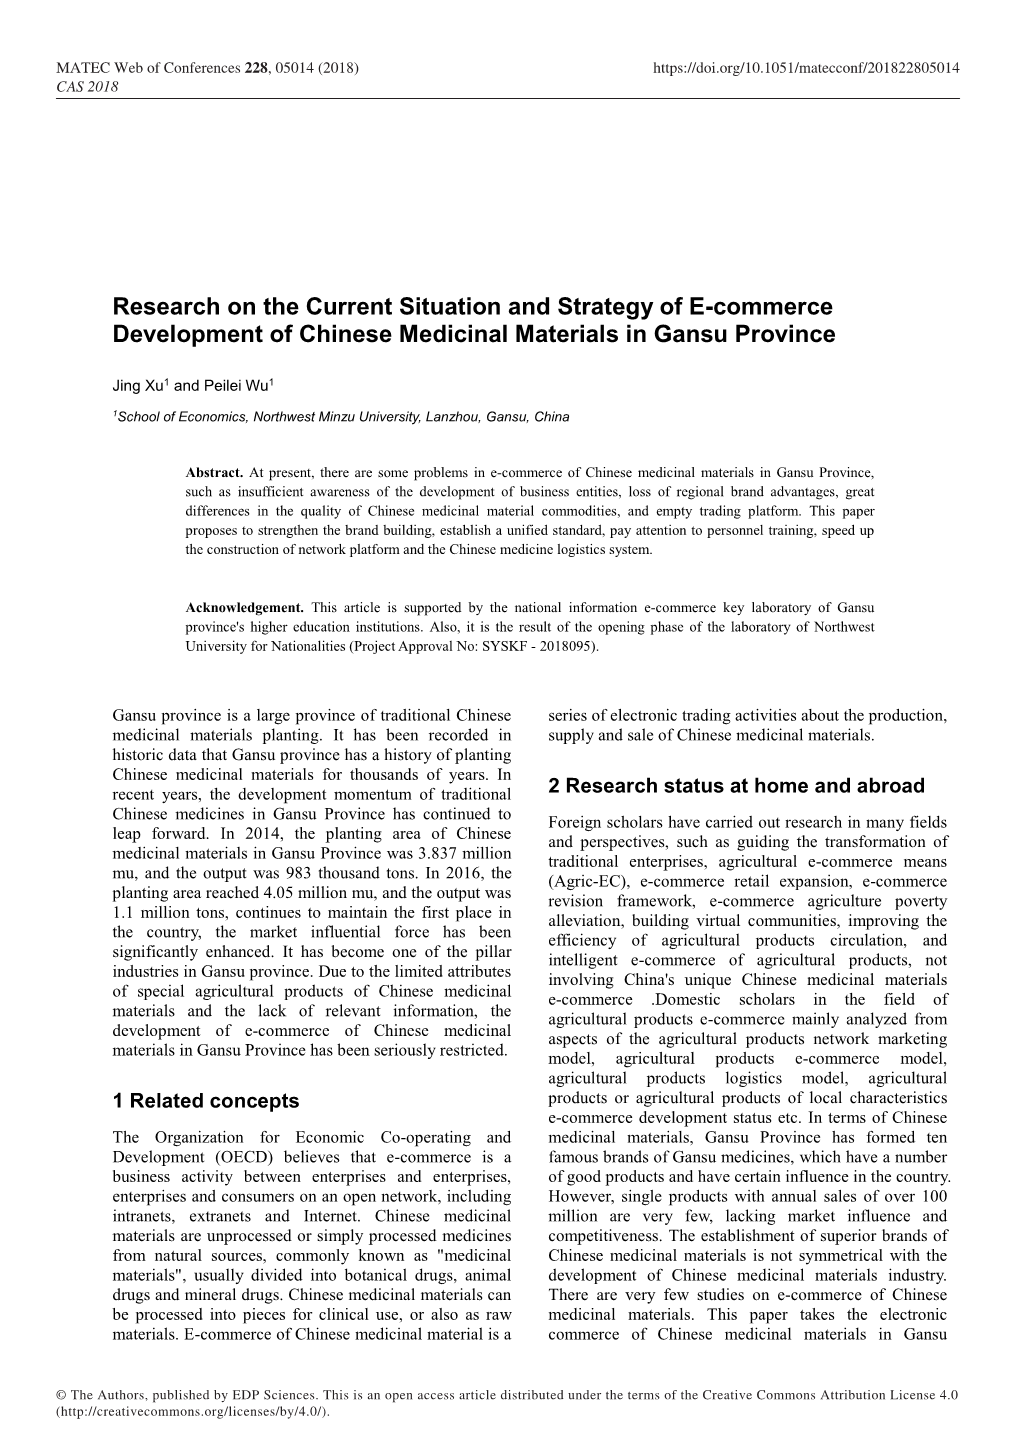 Research on the Current Situation and Strategy of E-Commerce Development of Chinese Medicinal Materials in Gansu Province